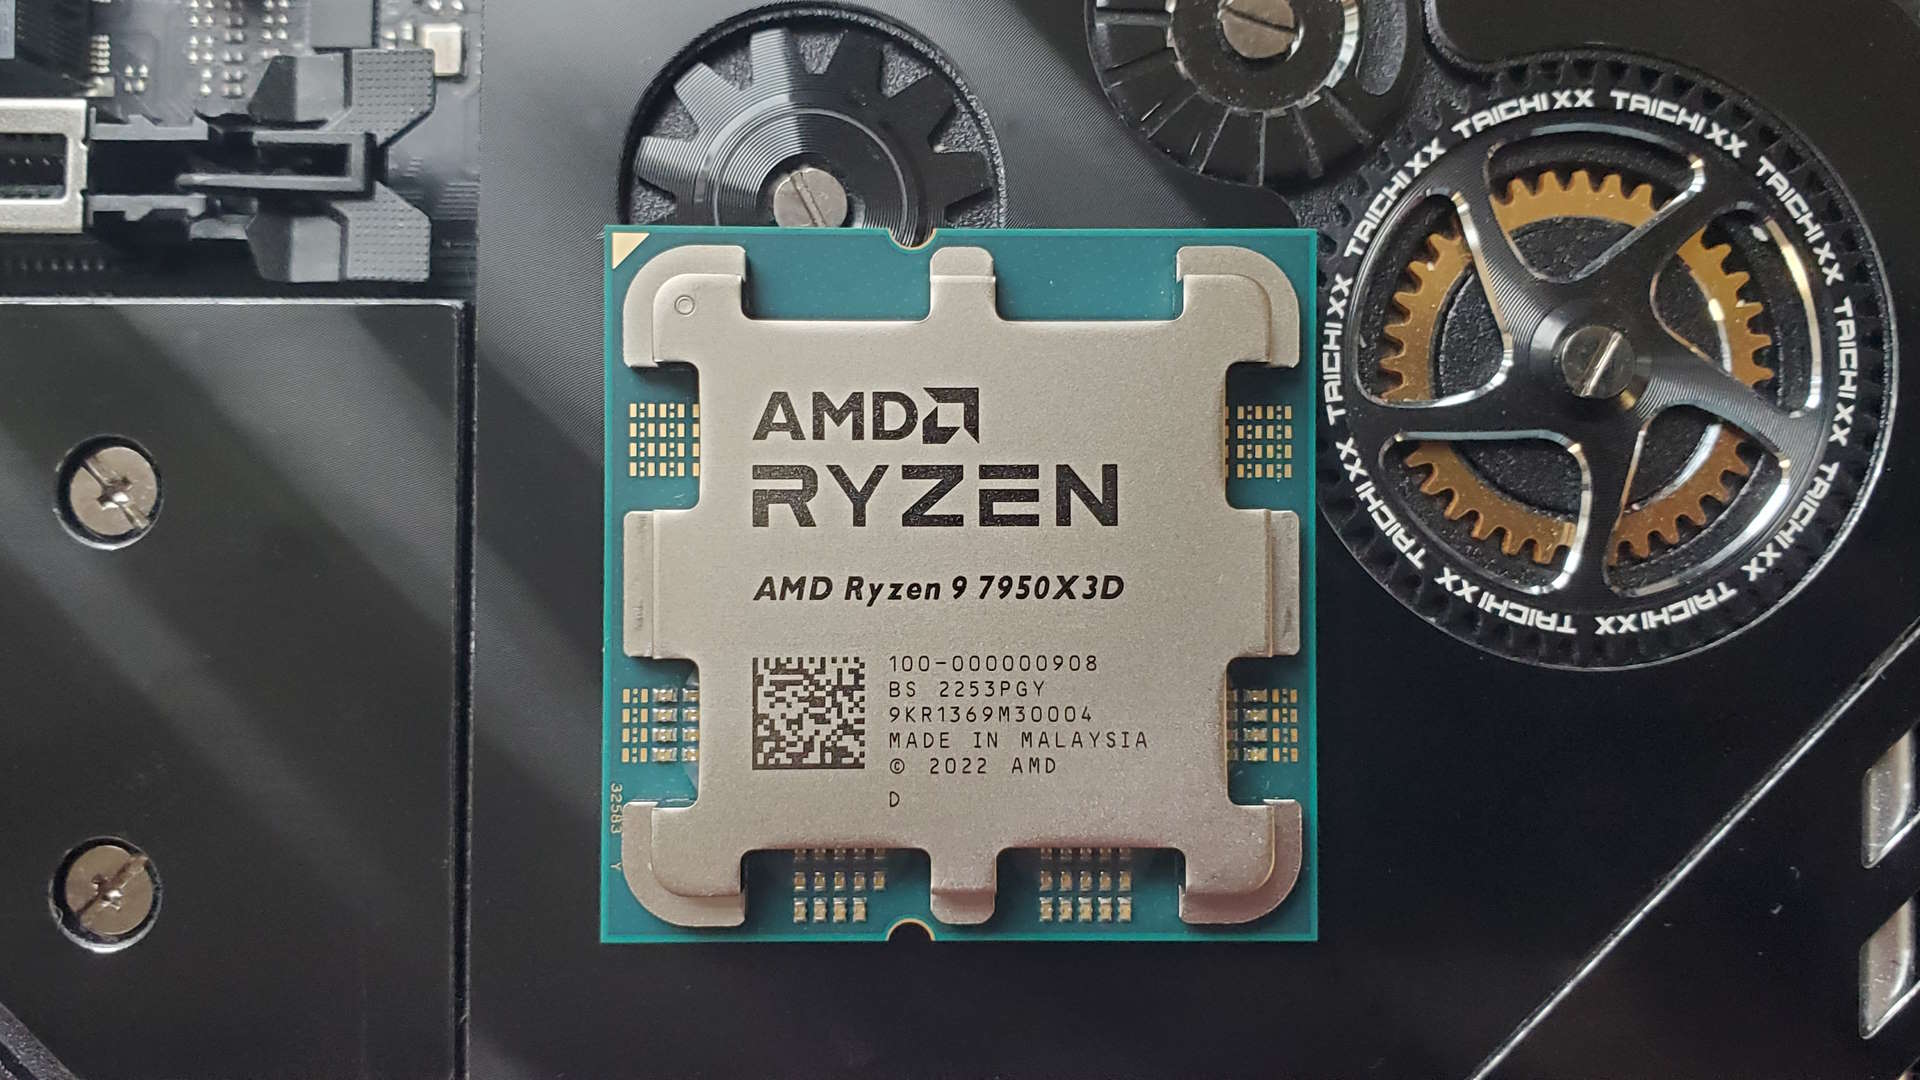 Amd Ryzen 9 7950x3d Review: Gamers, Don't Buy This